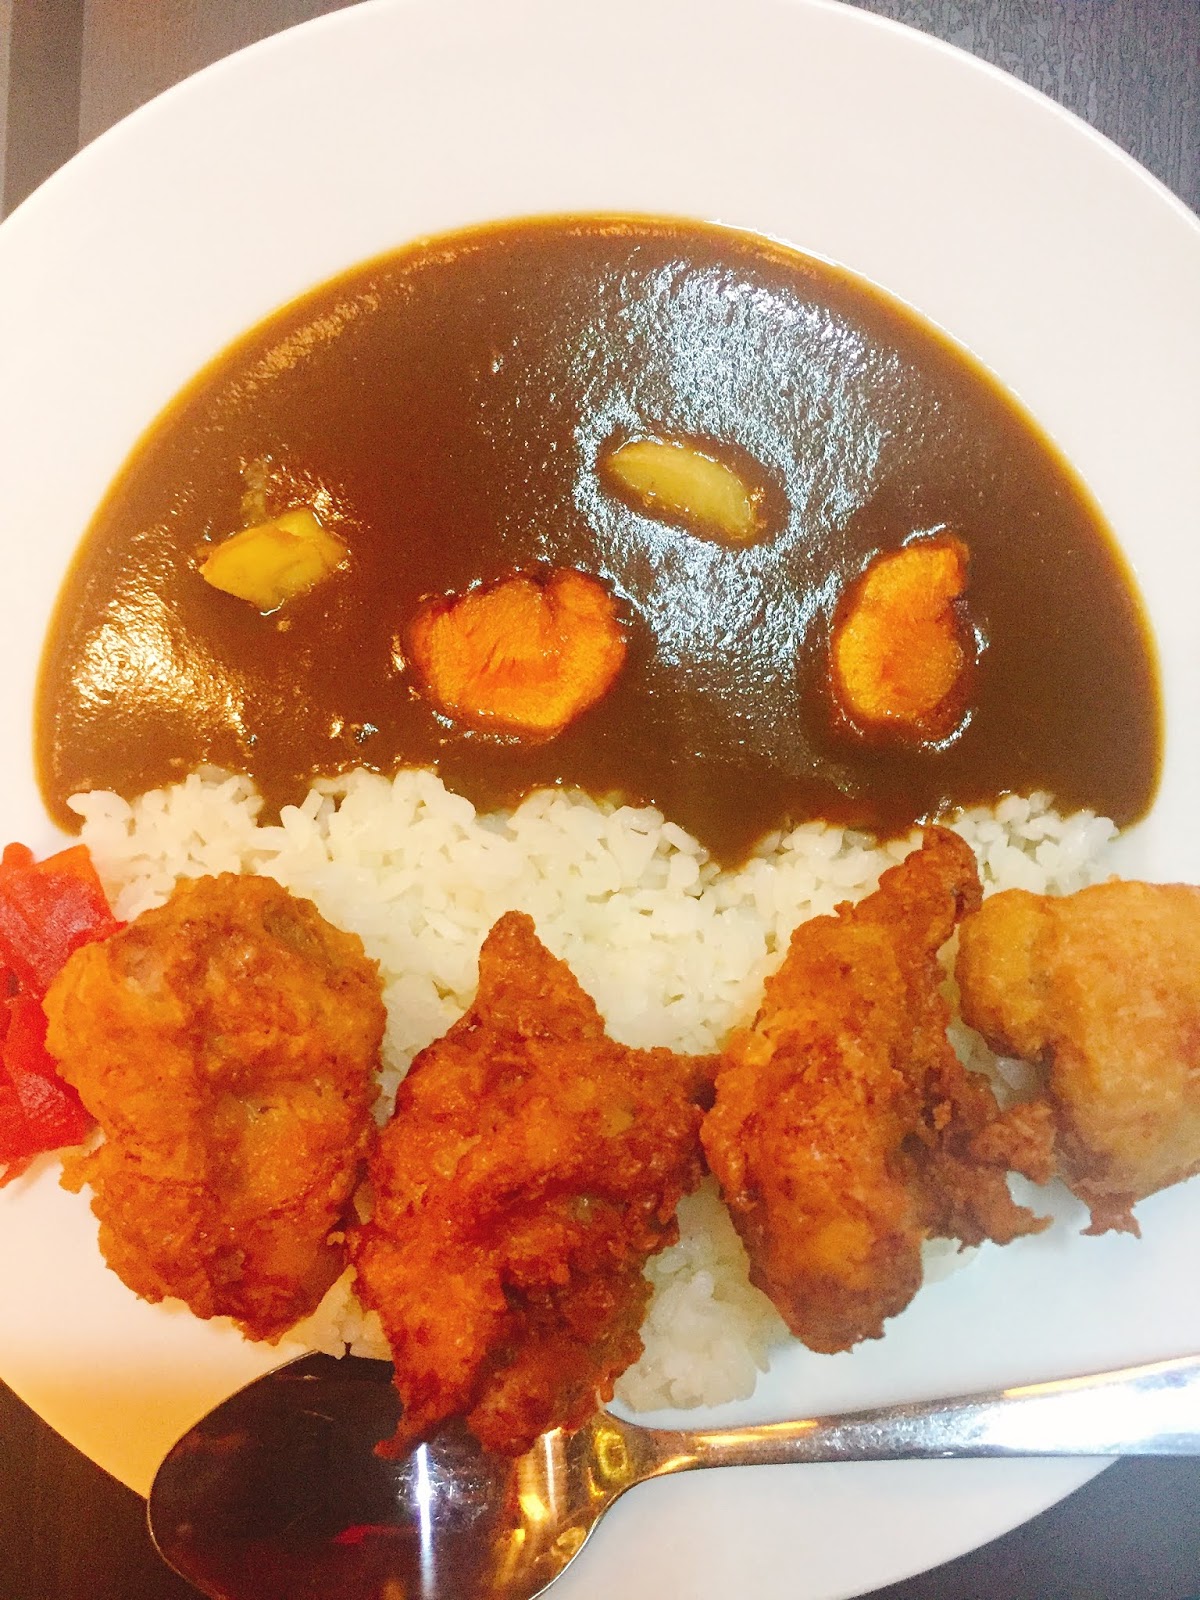 Curry%2Bwith%2Bchicken%2B%25283%2529.JPG